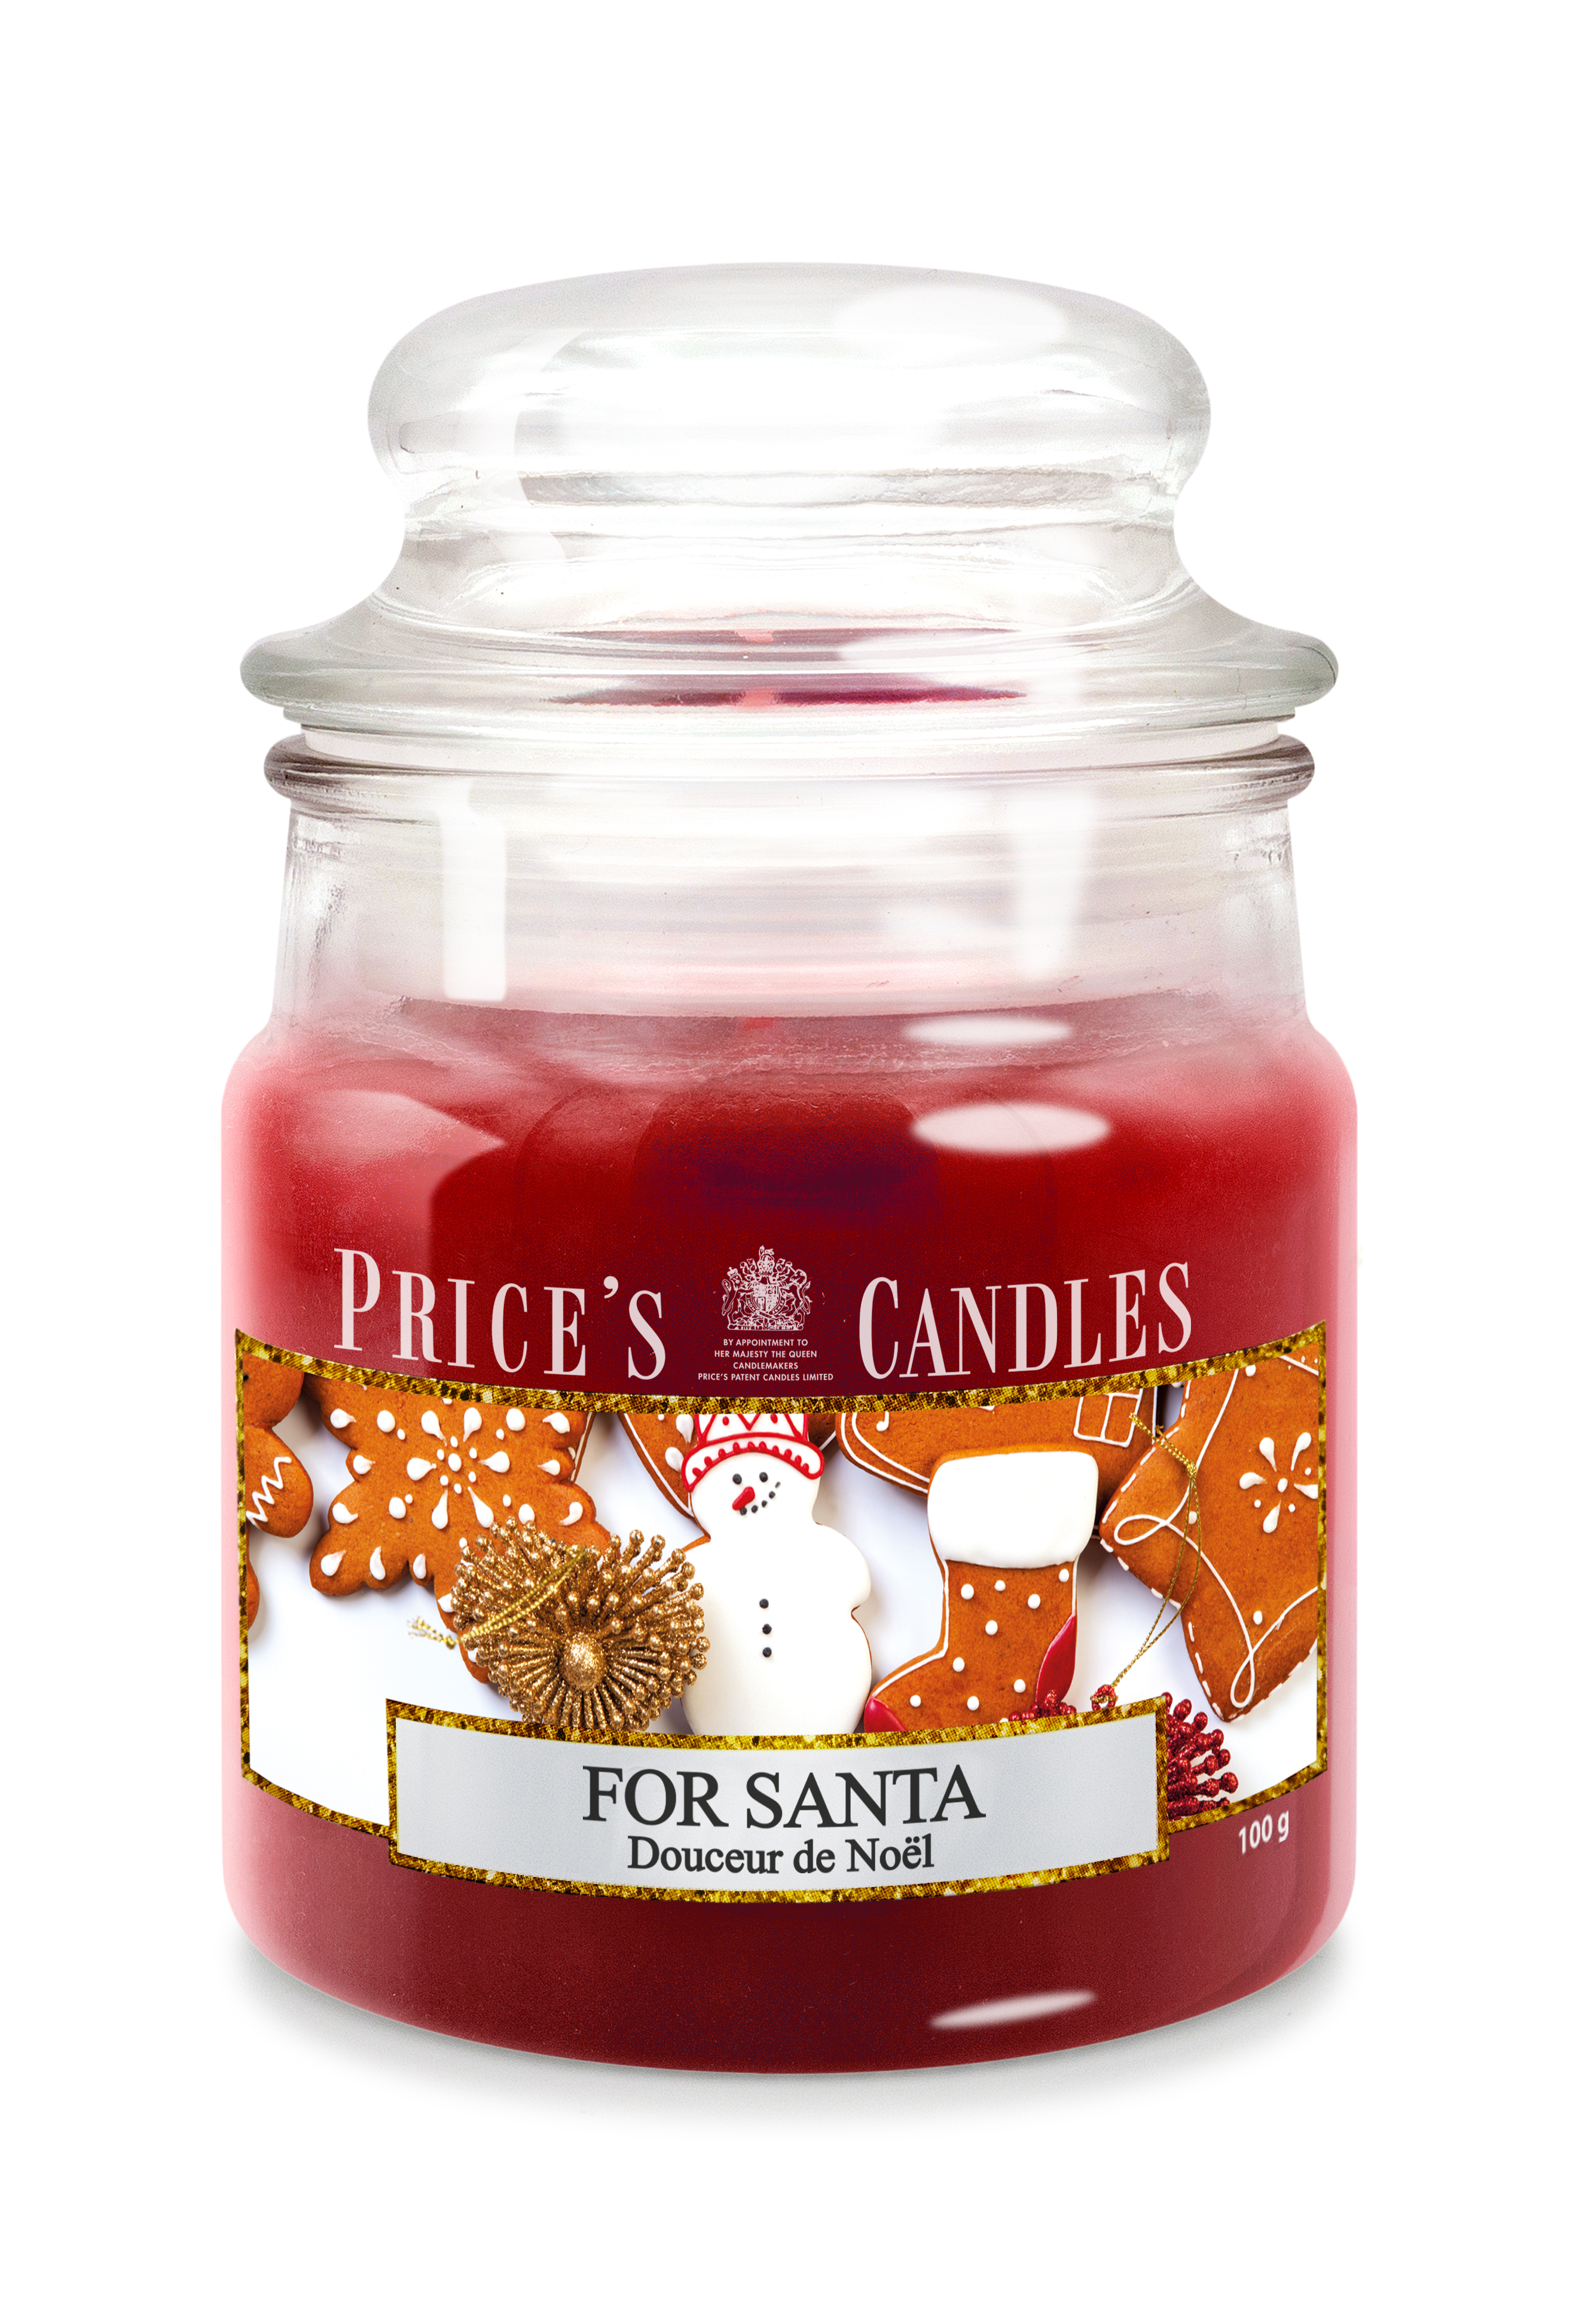 Prices Candle "For Santa" 100g 